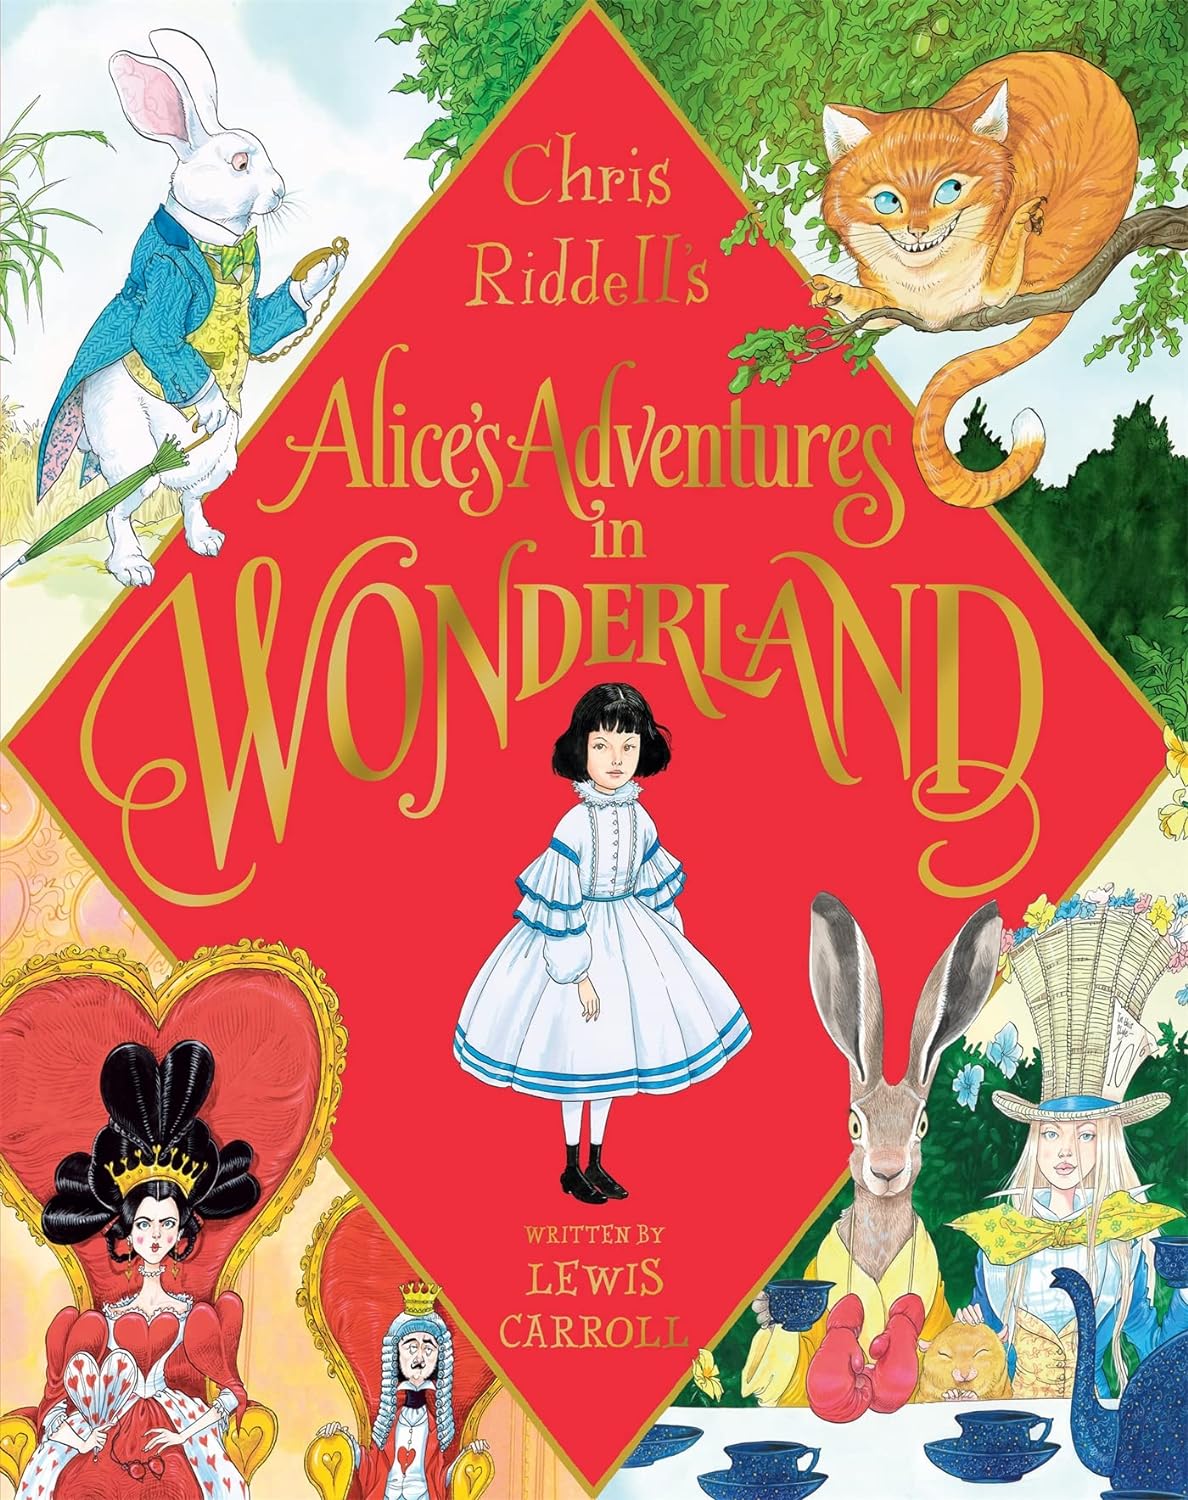 Lewis Carroll: Alice's Adventures in Wonderland, illustrated by Chris Riddell